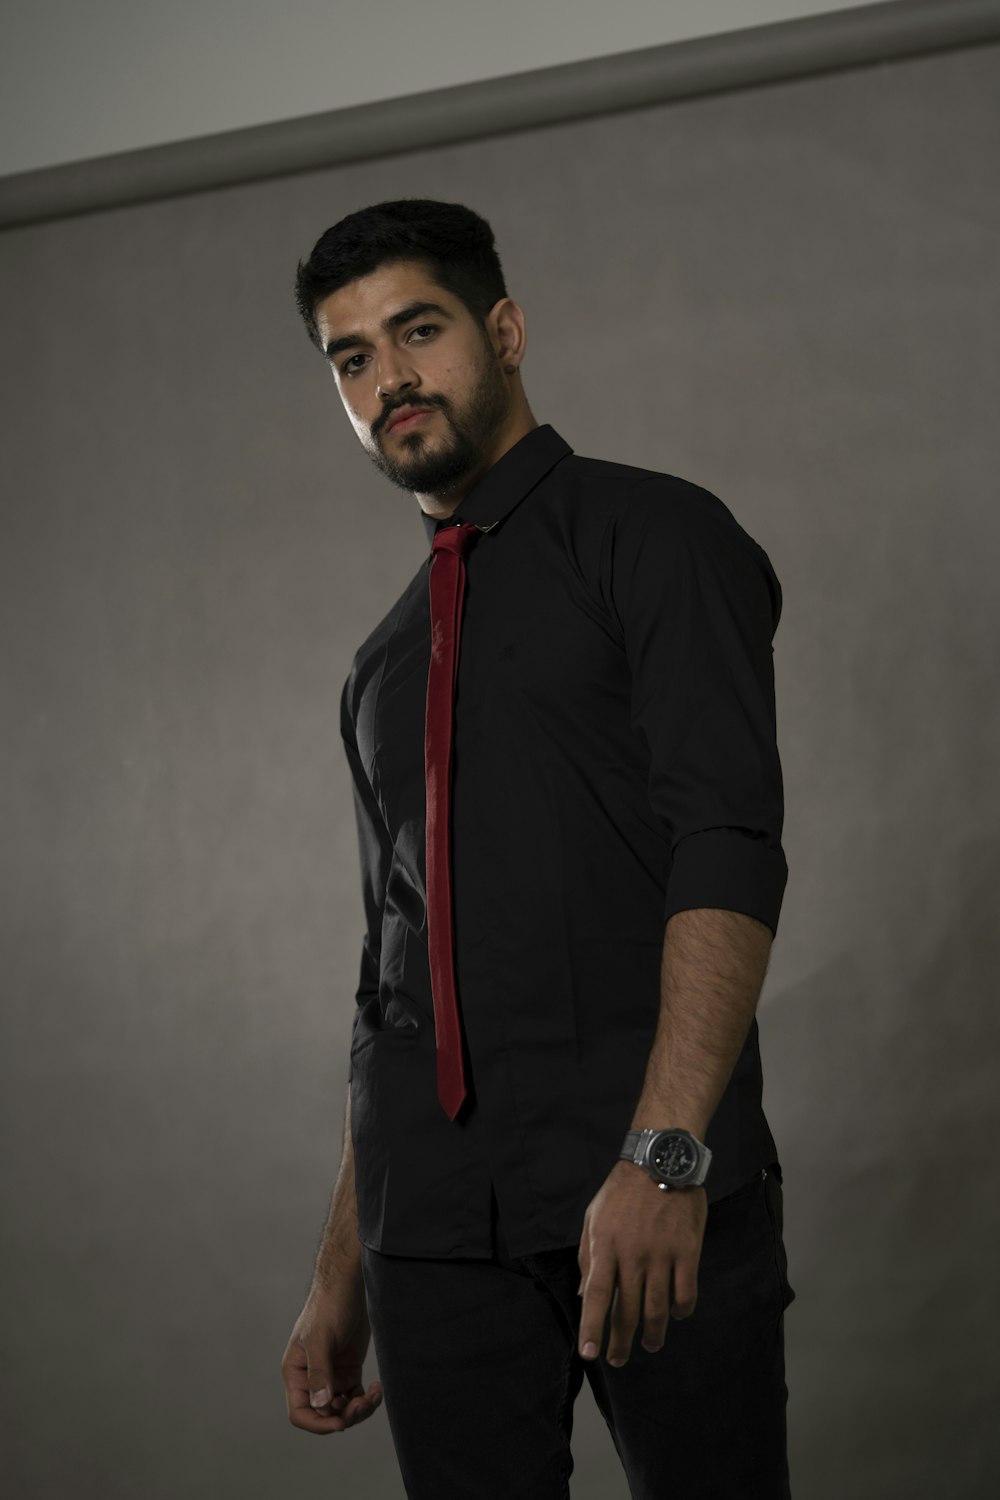 a man in a black shirt and red tie